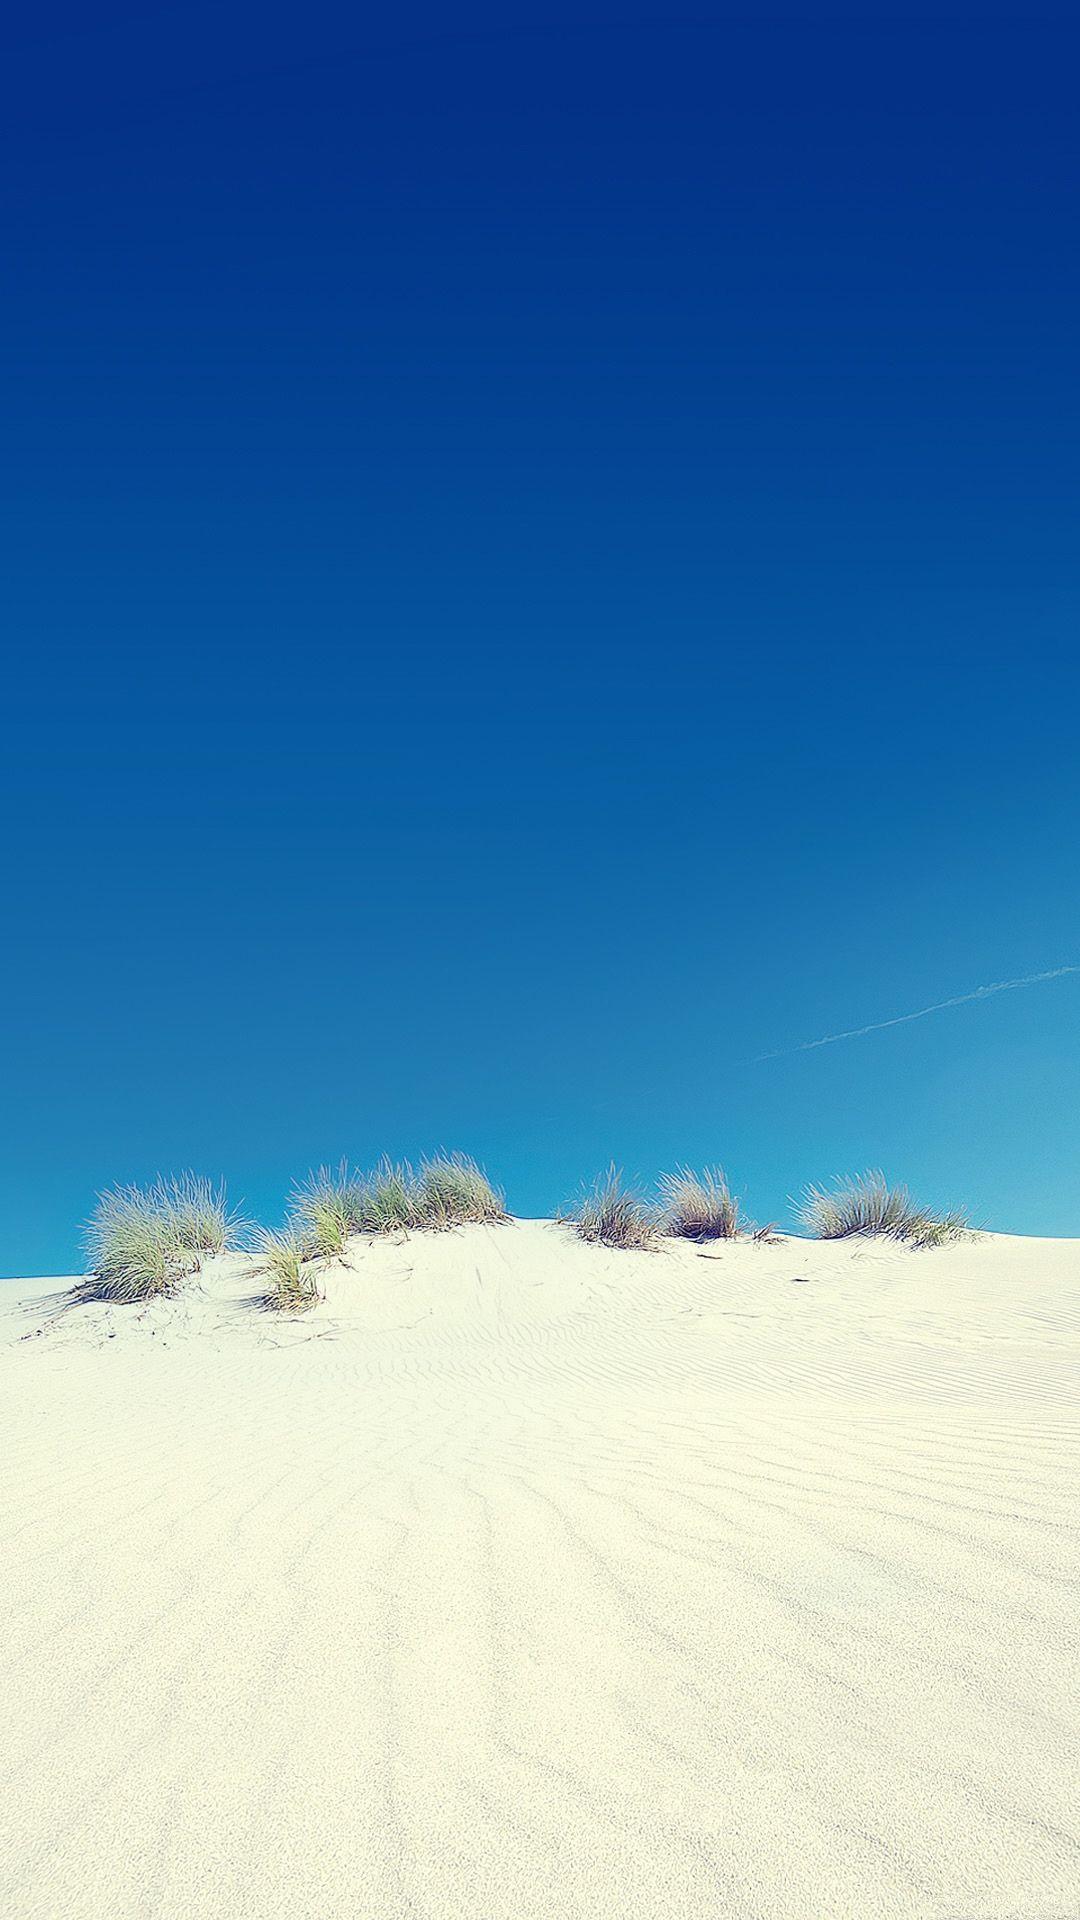 Desert Sand Dune Clear Blue Sky Android Wallpapers